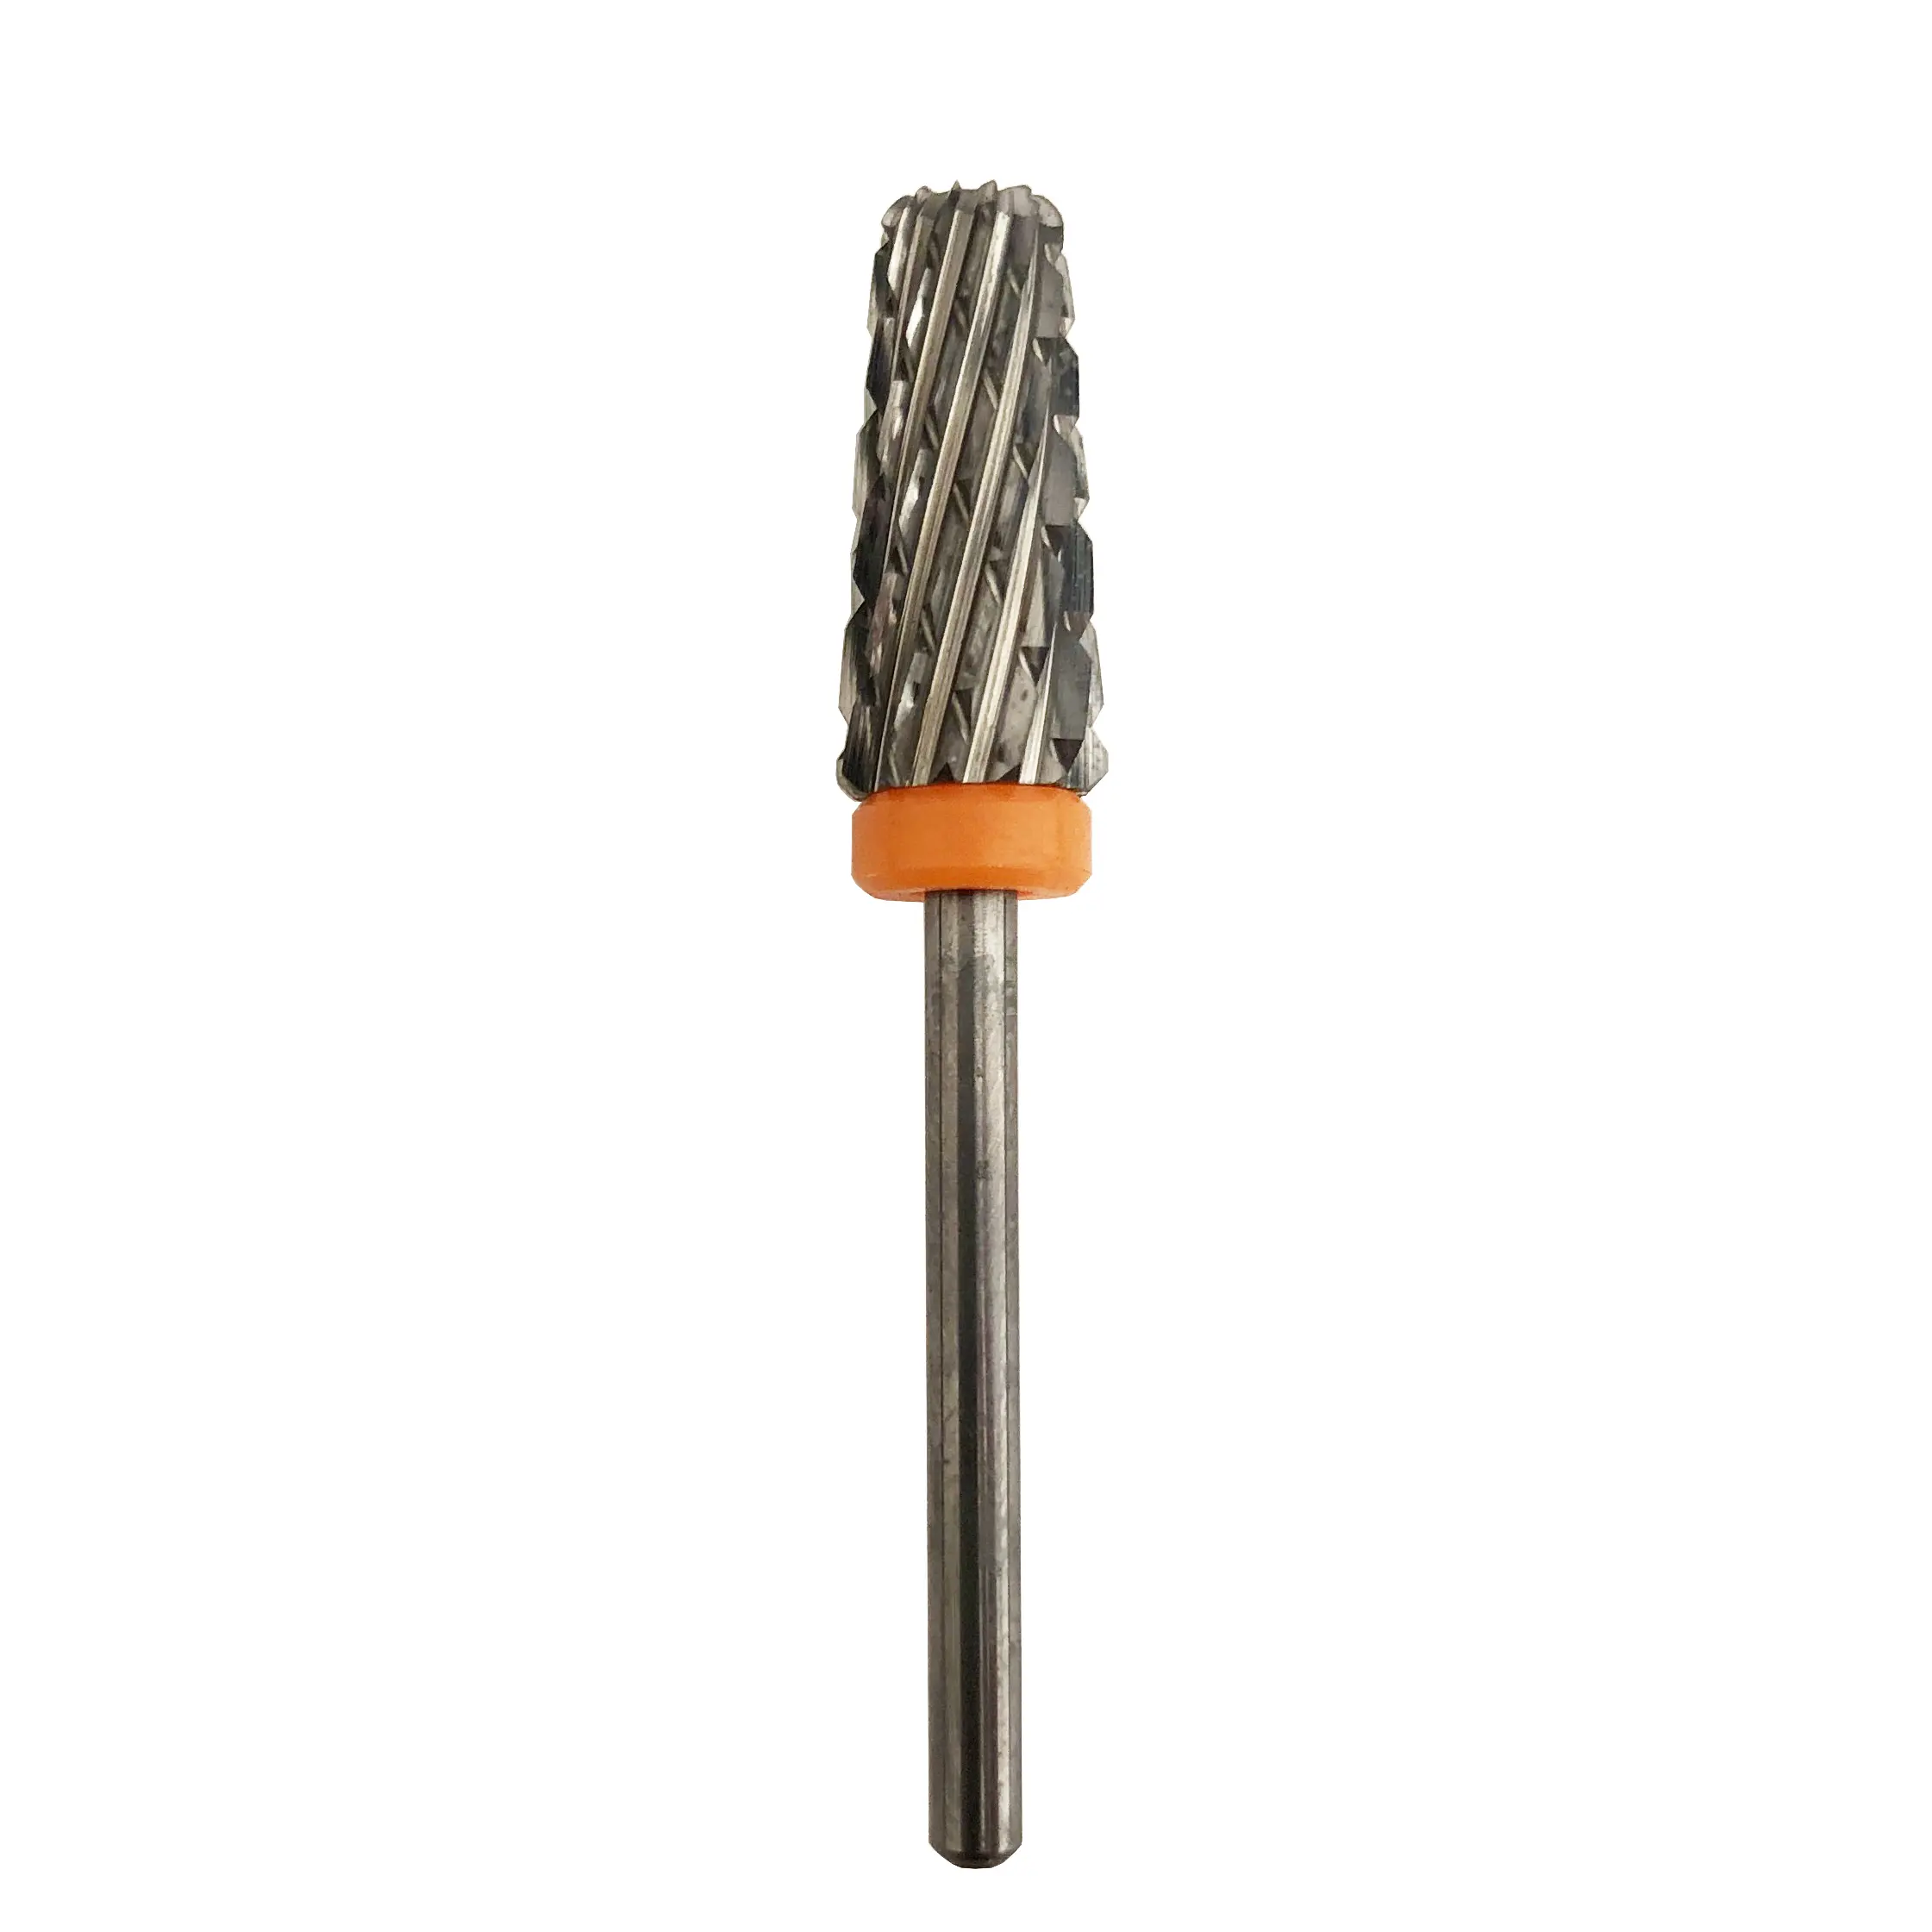 APROMS 5-IN-1 Carbide Nail Drill Bits Tapered Umbrella Straight Cross Cut Tungsten Gel Milling Cutter Acrylics Electric Manicure